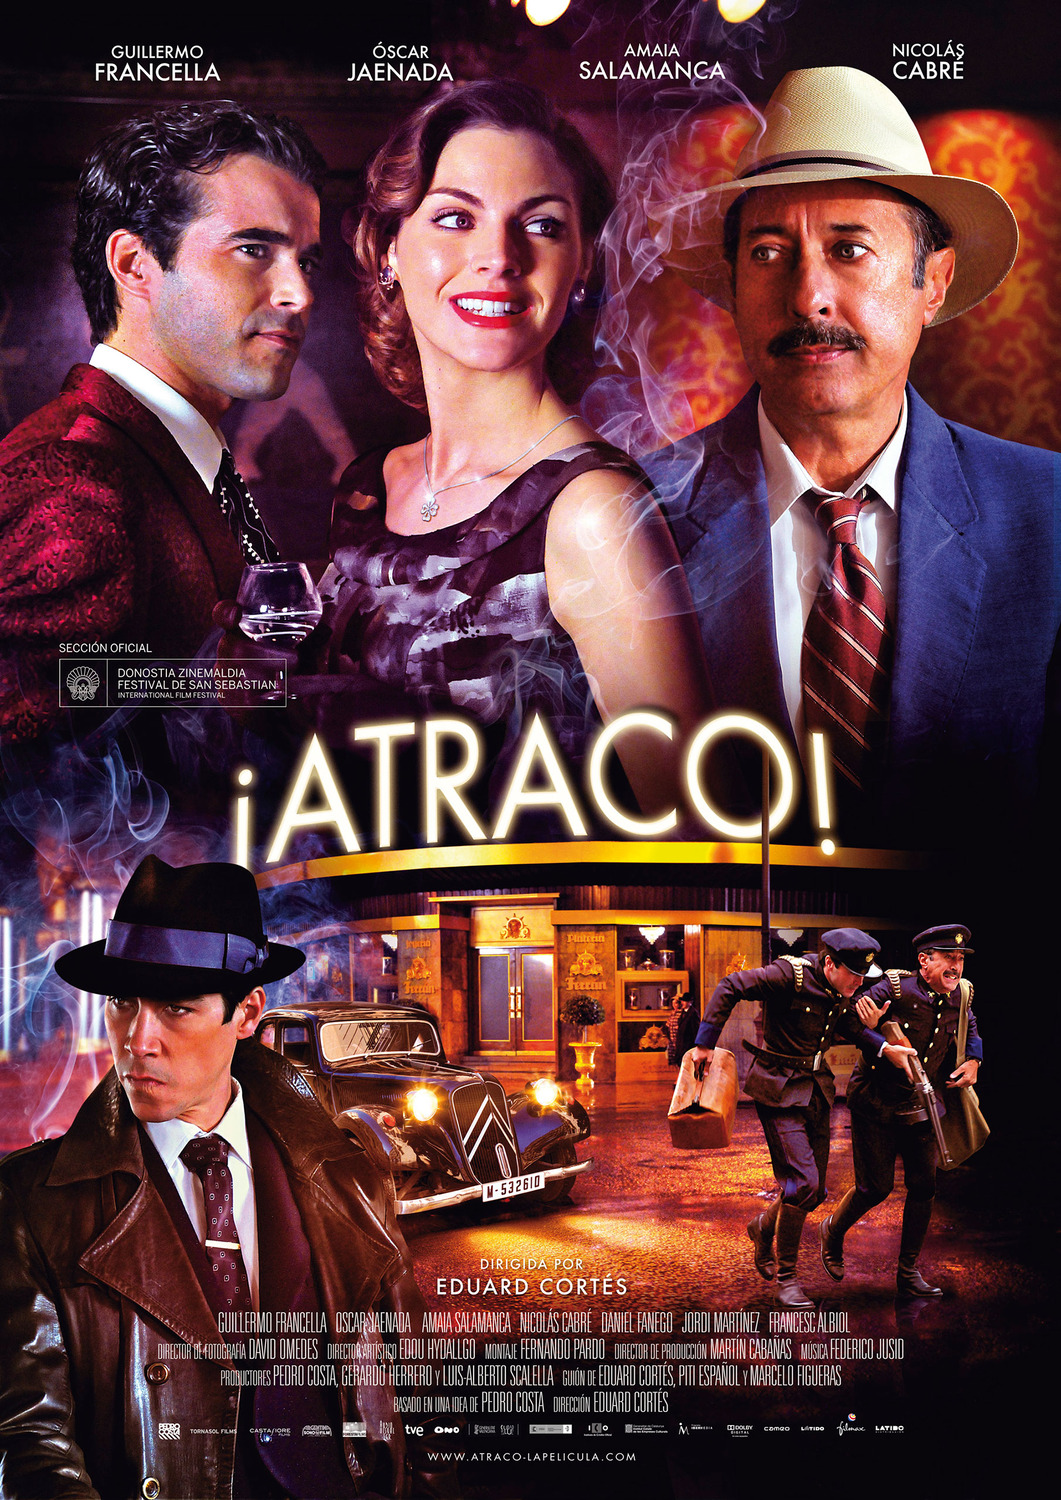 Extra Large Movie Poster Image for ¡Atraco! 